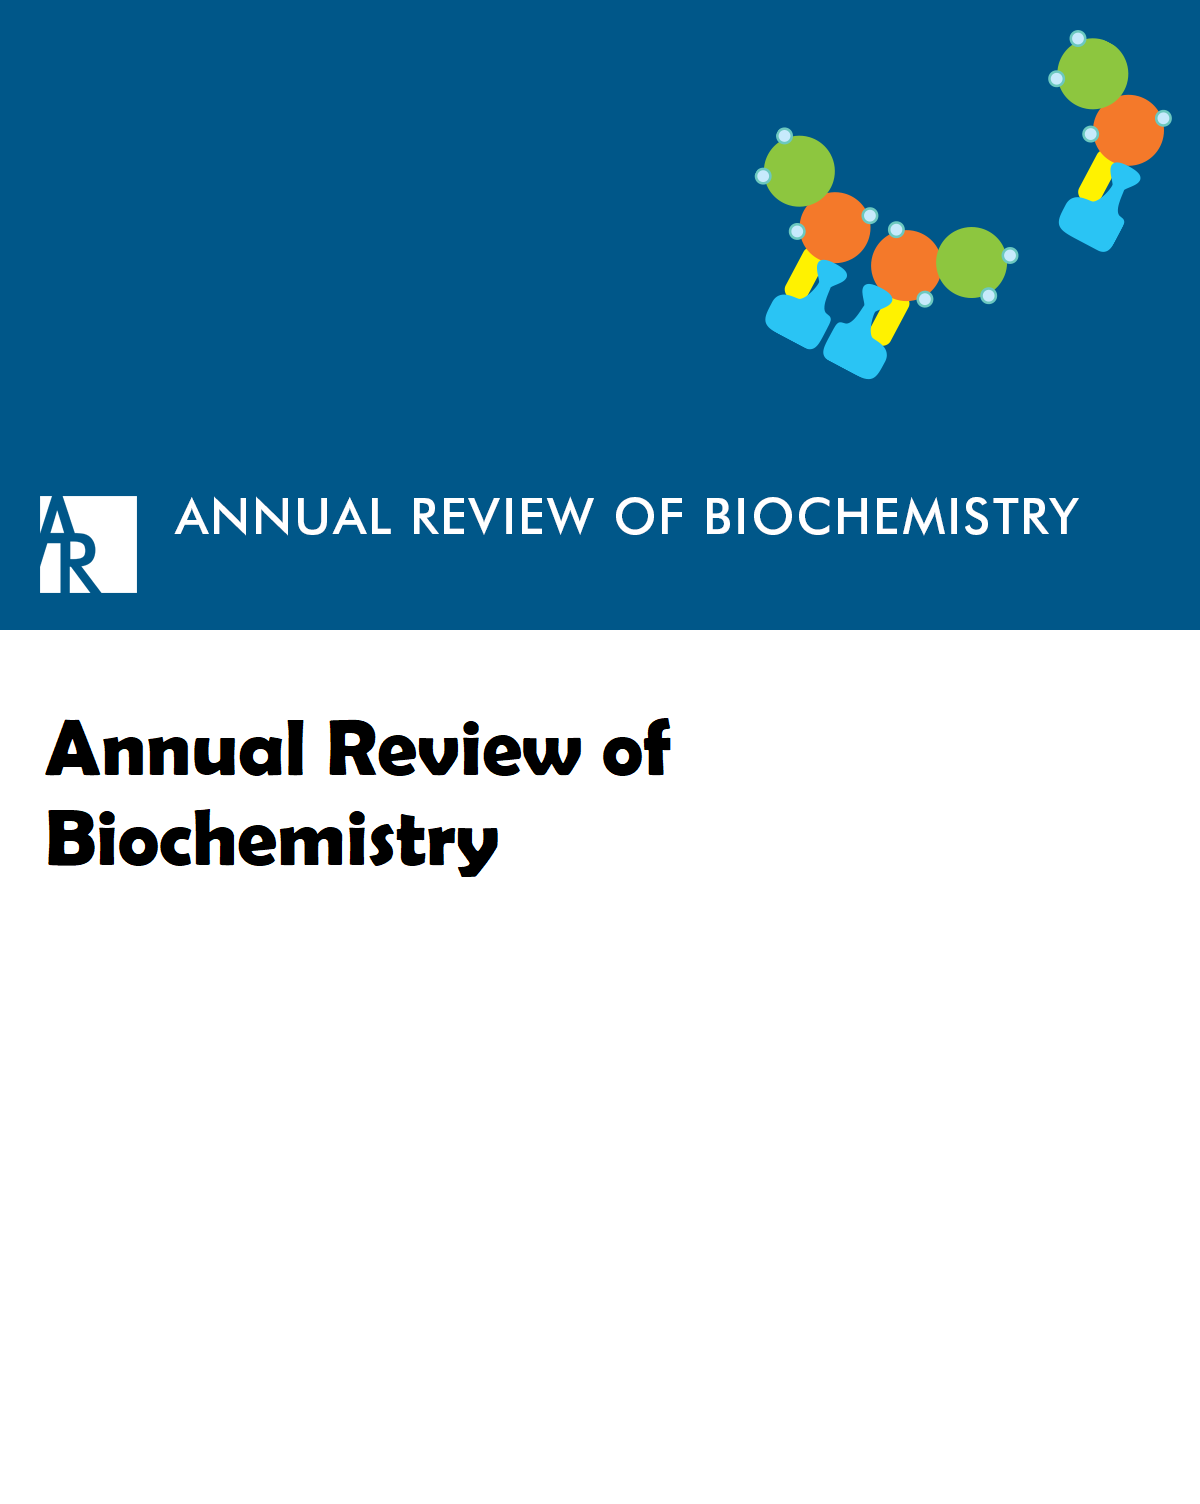 Annual Review of Biochemistry Impact Factor, Indexing, Acceptance rate